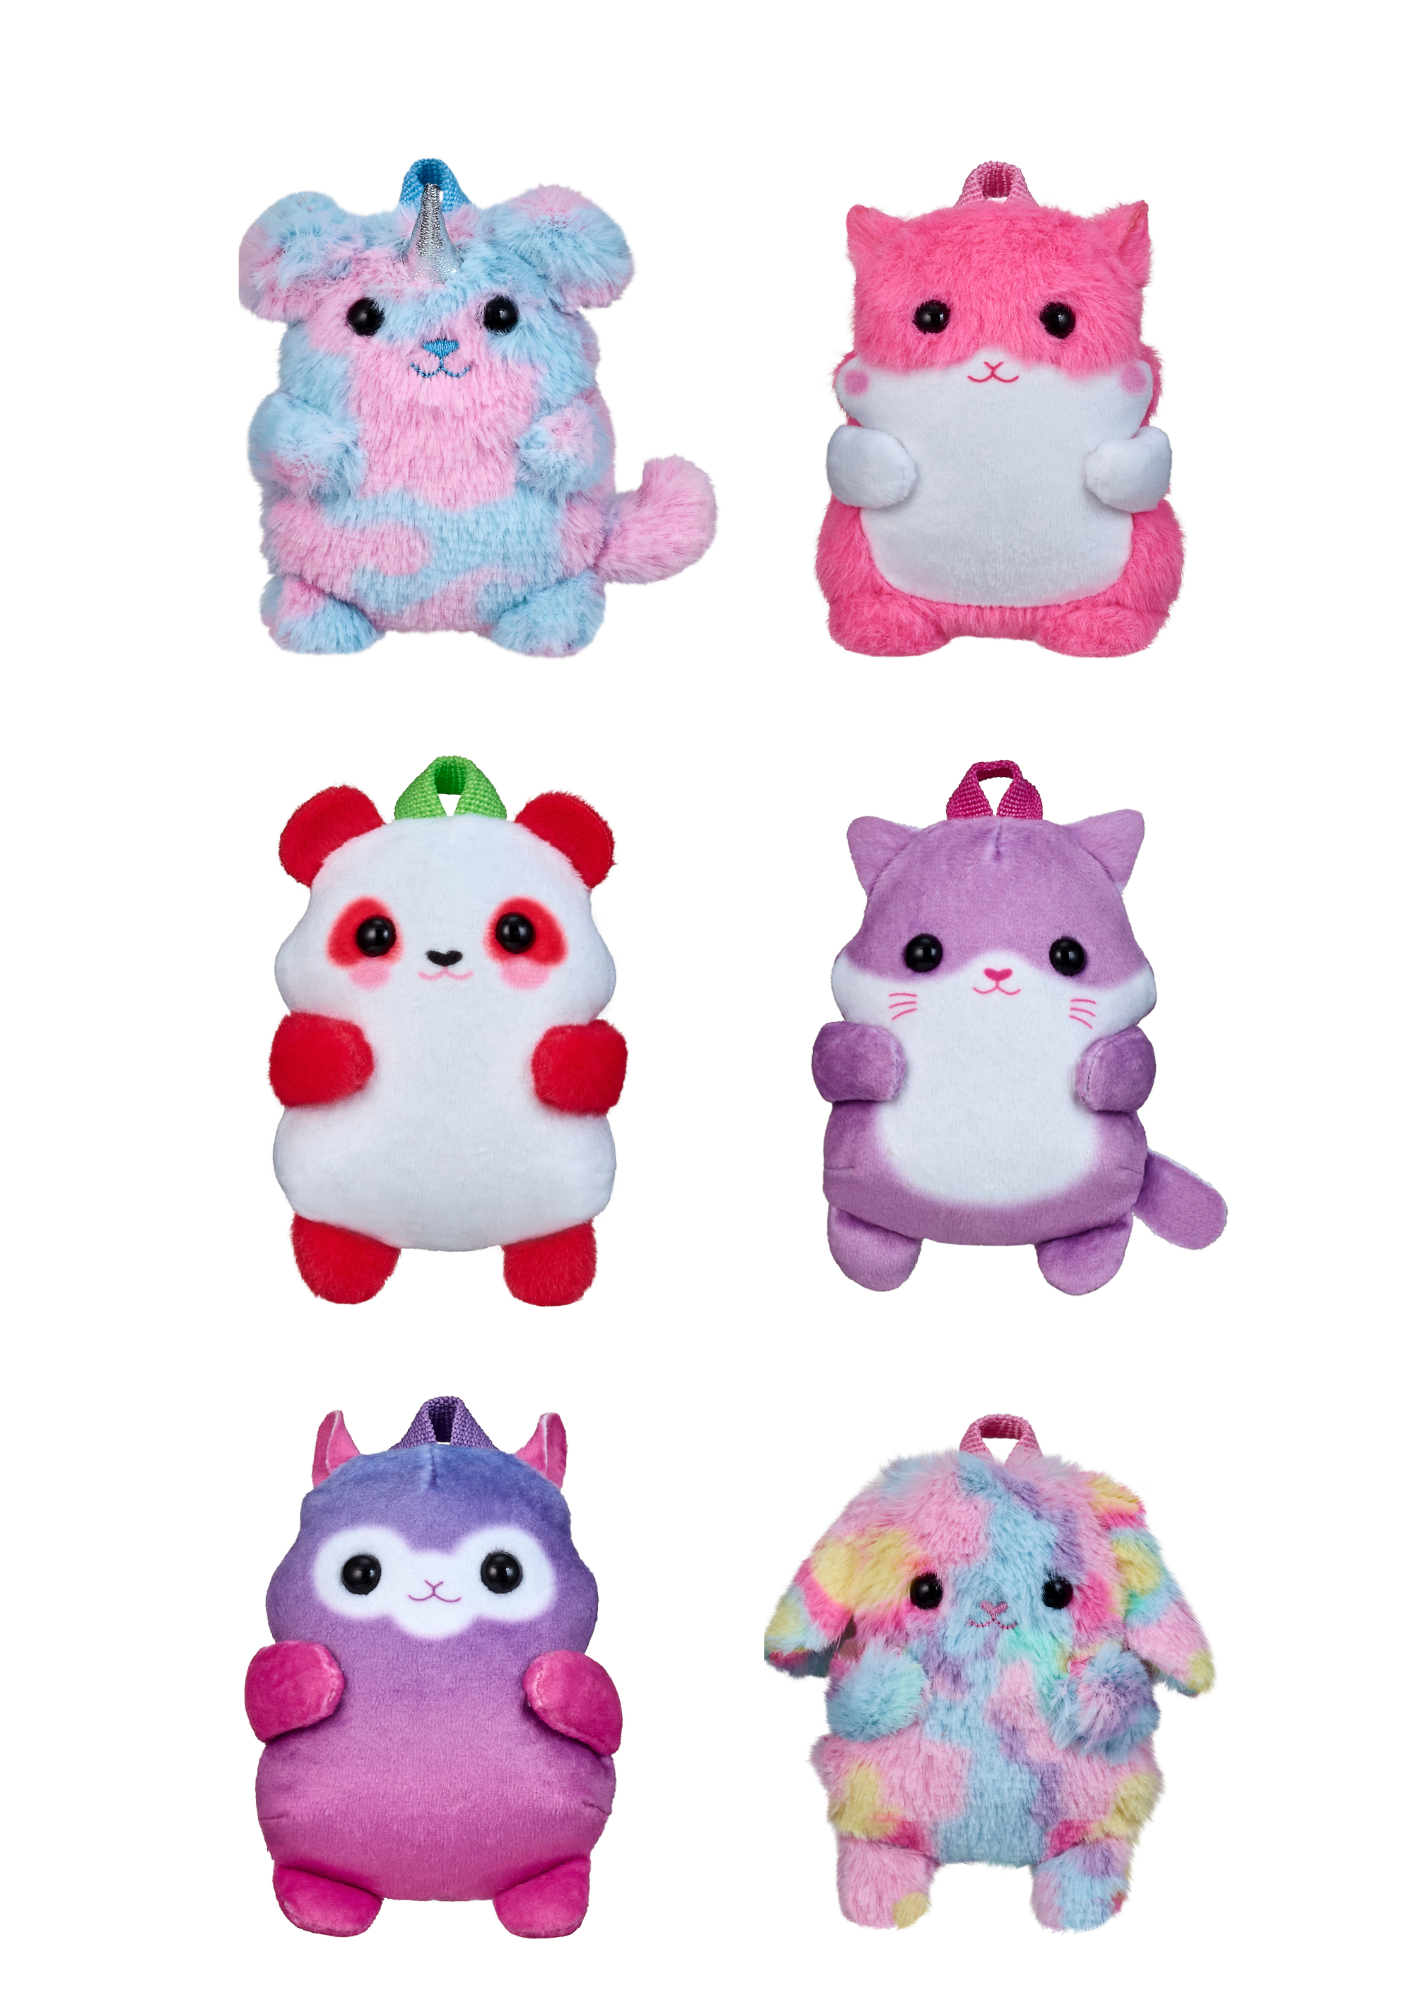 https://scale.coolshop-cdn.com/product-media.coolshop-cdn.com/23FS4D/cc4f1ac1c07944ccbe6959a7d4beba52.png/f/real-littles-backpack-plush-pets-30435.png